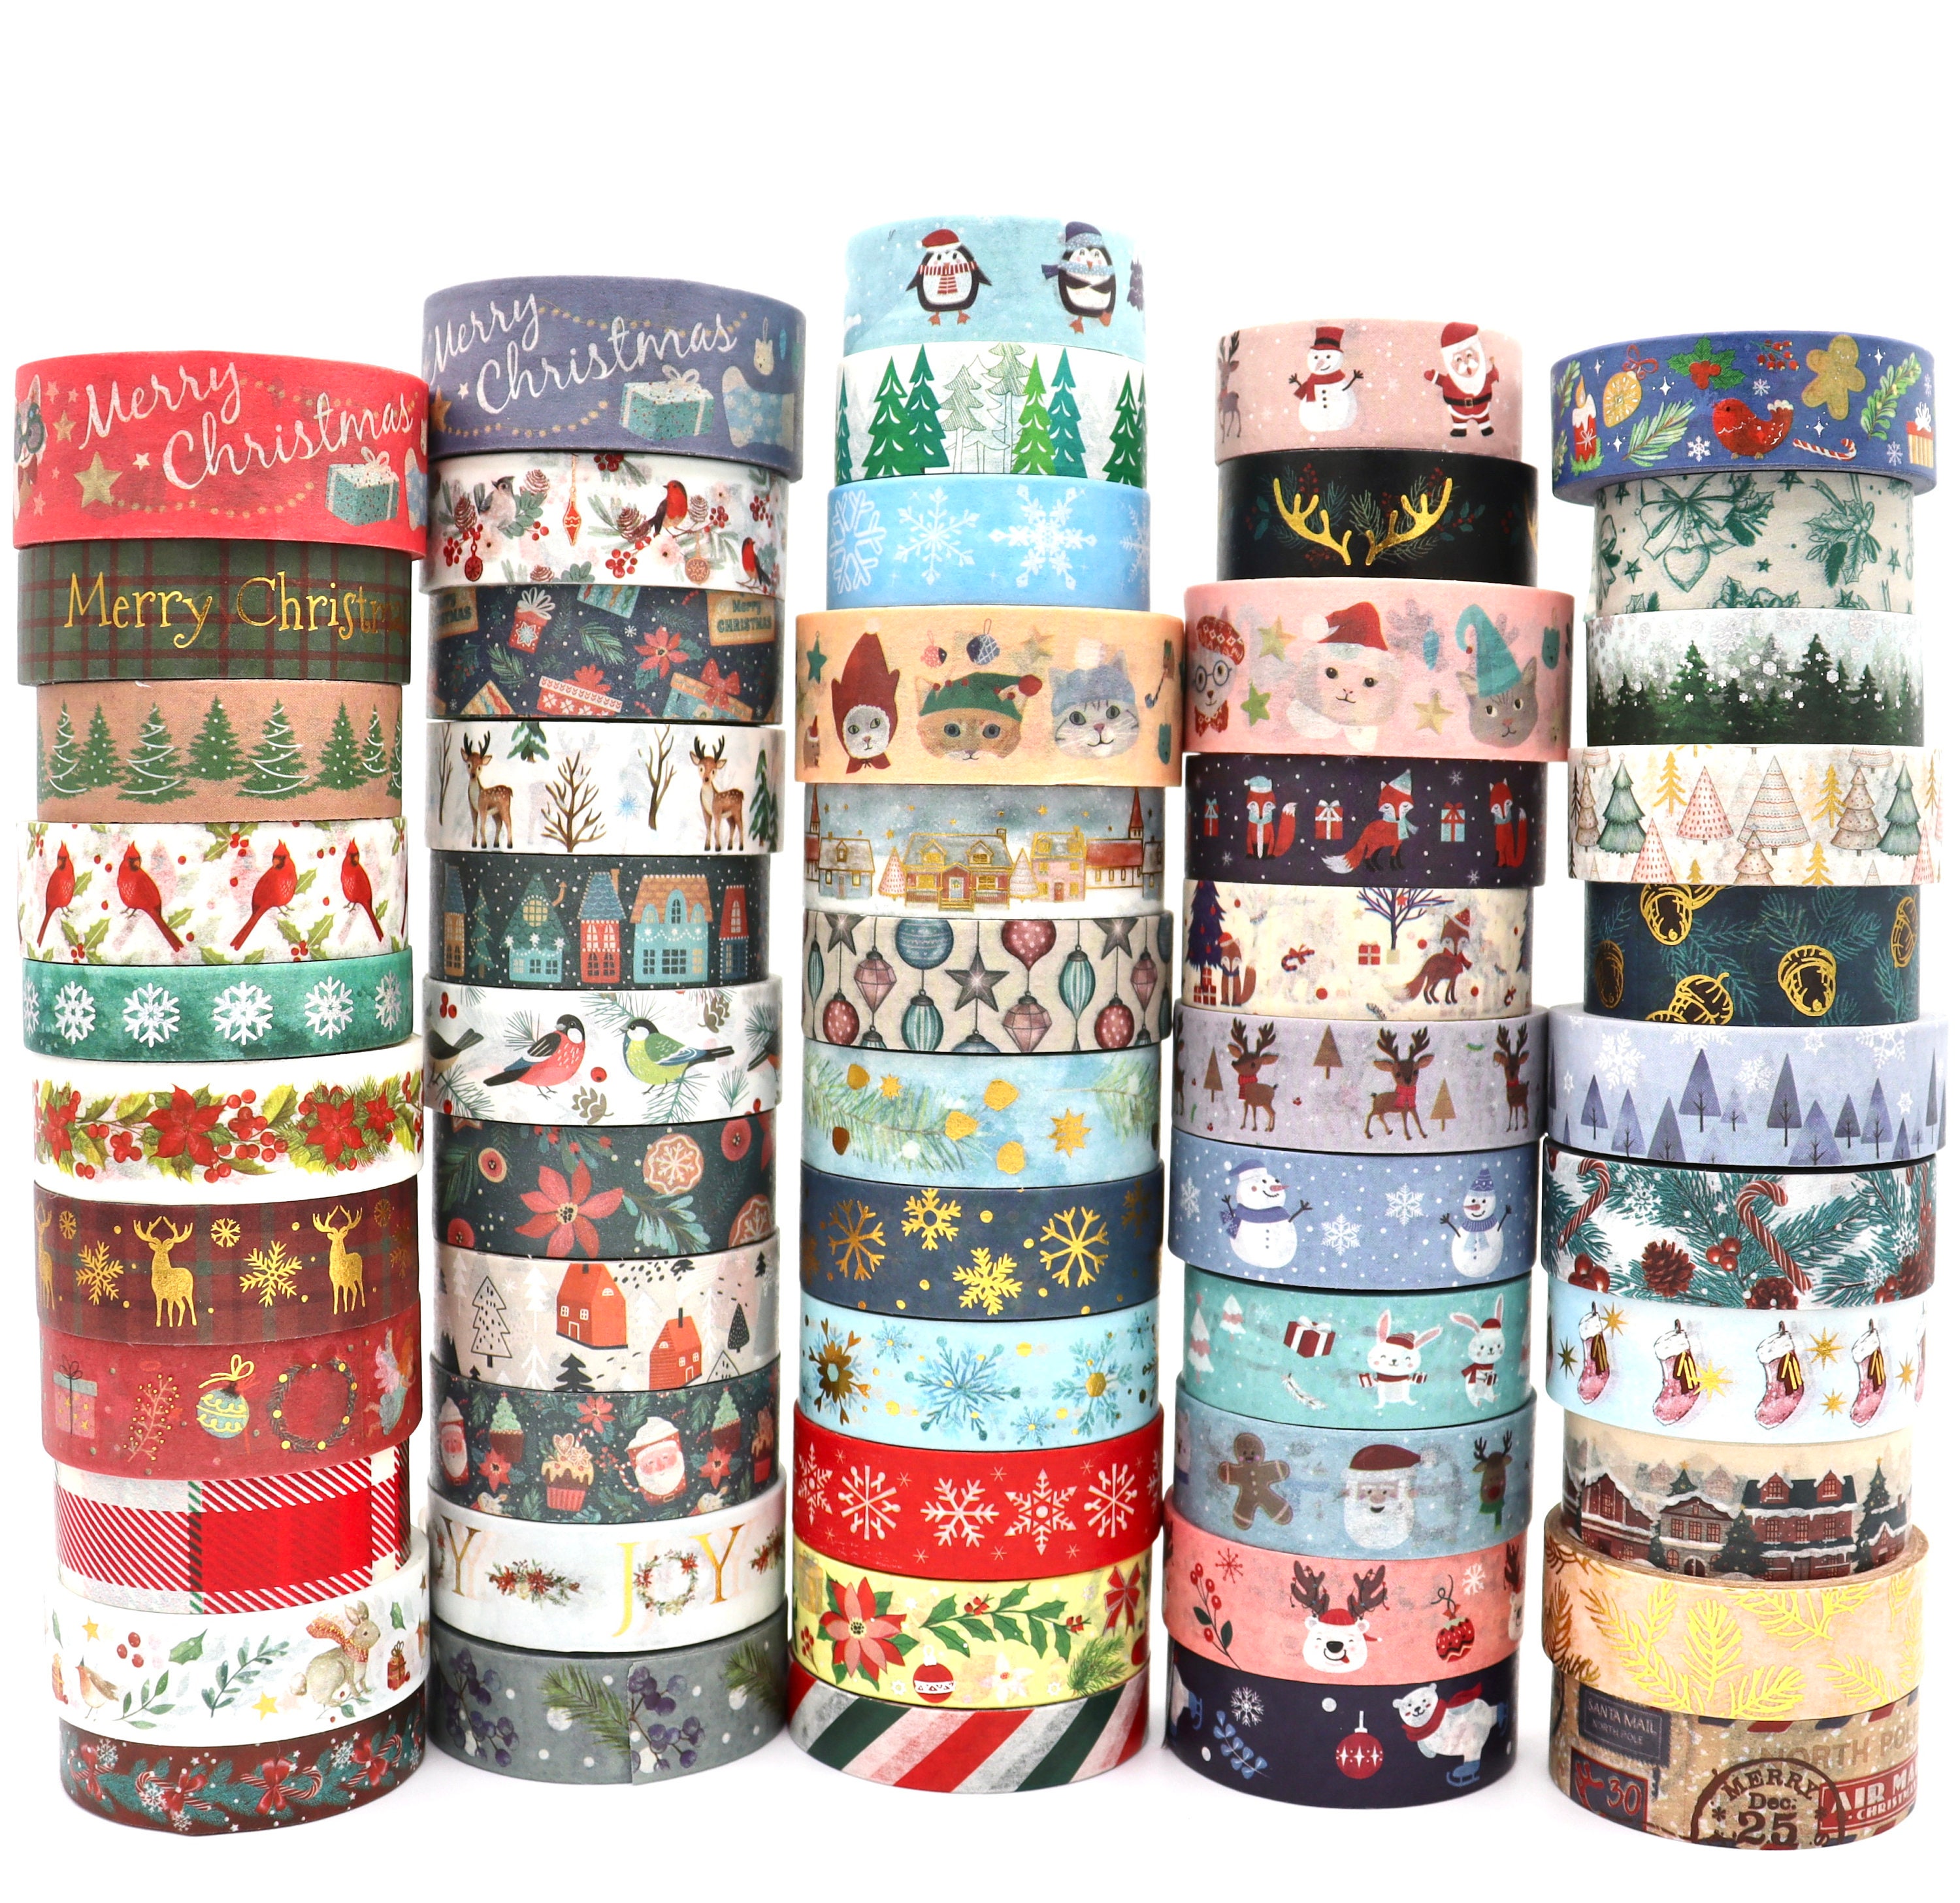 Cute Christmas Washi Tape Samples Decorative Tape for Crafts Cute